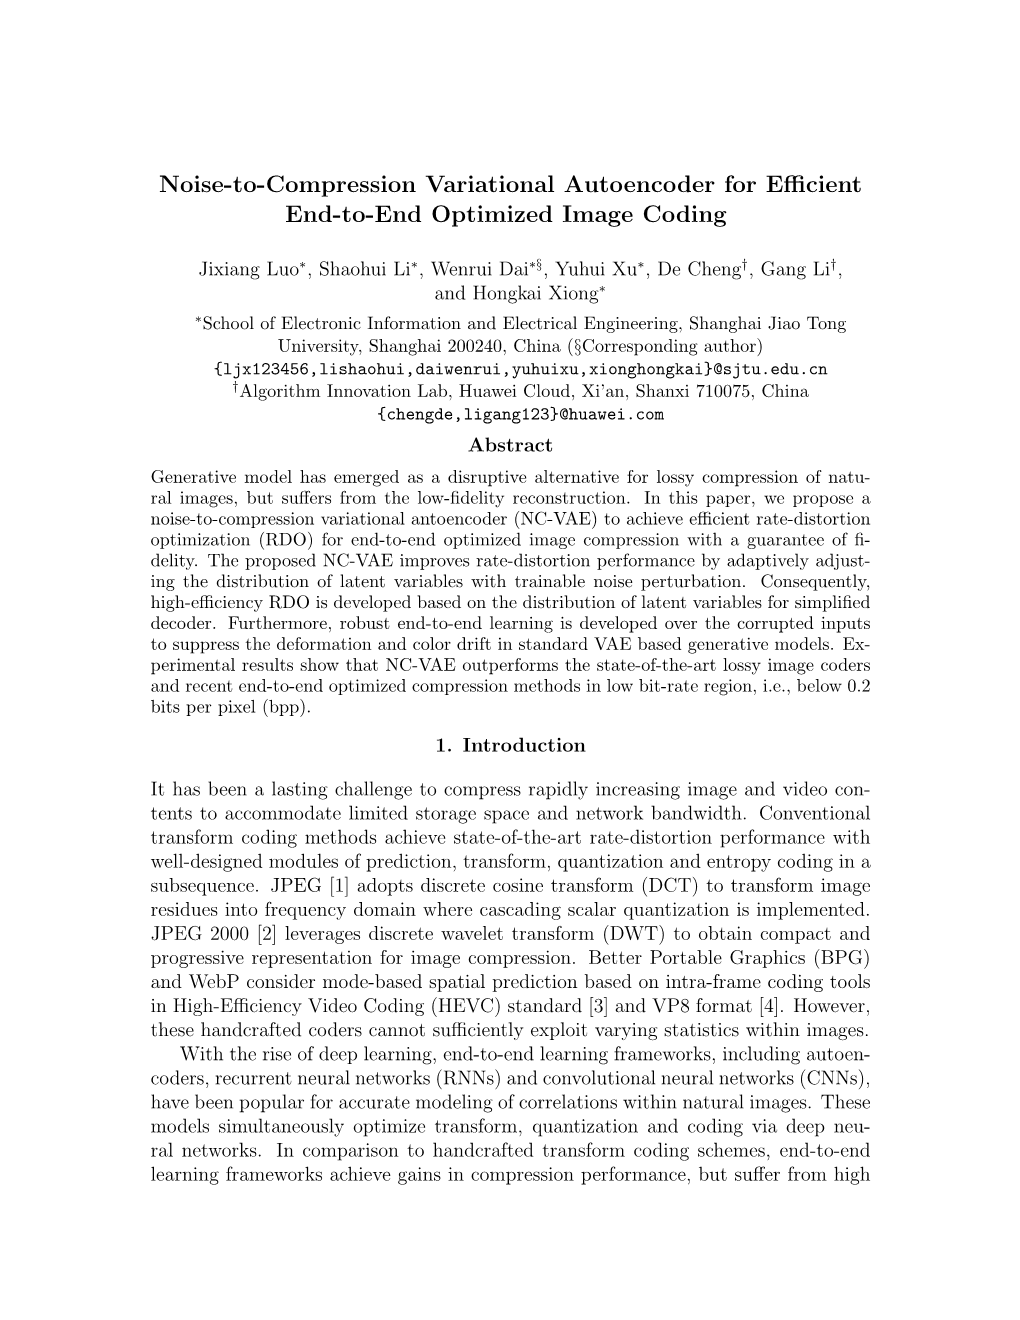 Noise-To-Compression Variational Autoencoder for Efficient End-To